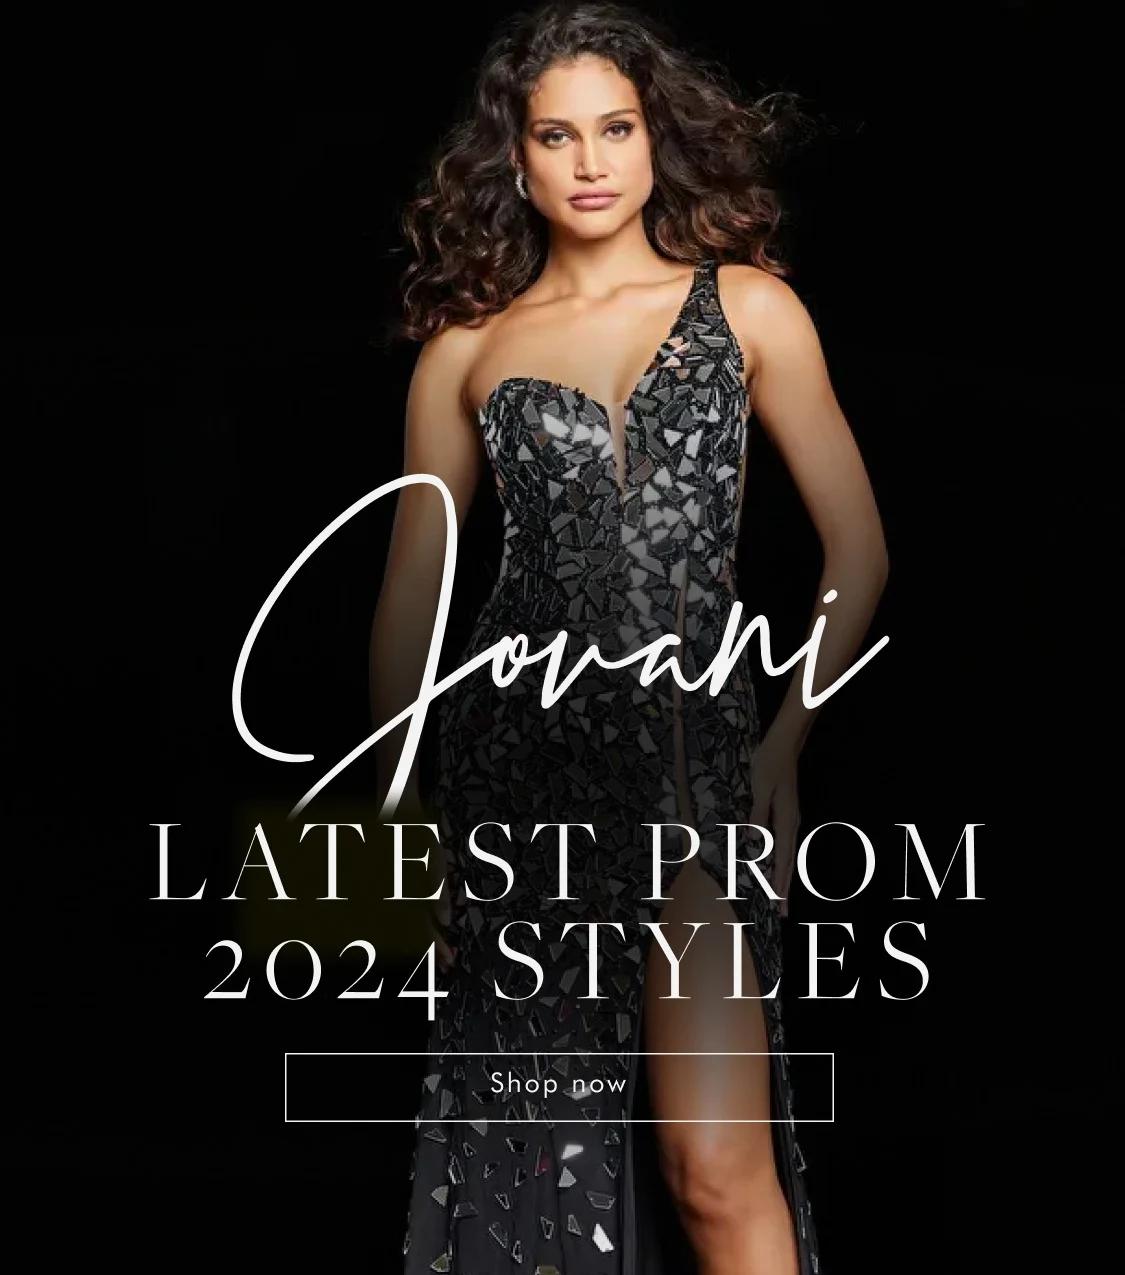 Mobile Jovani 2024 Prom Latest Prom Styles Banner